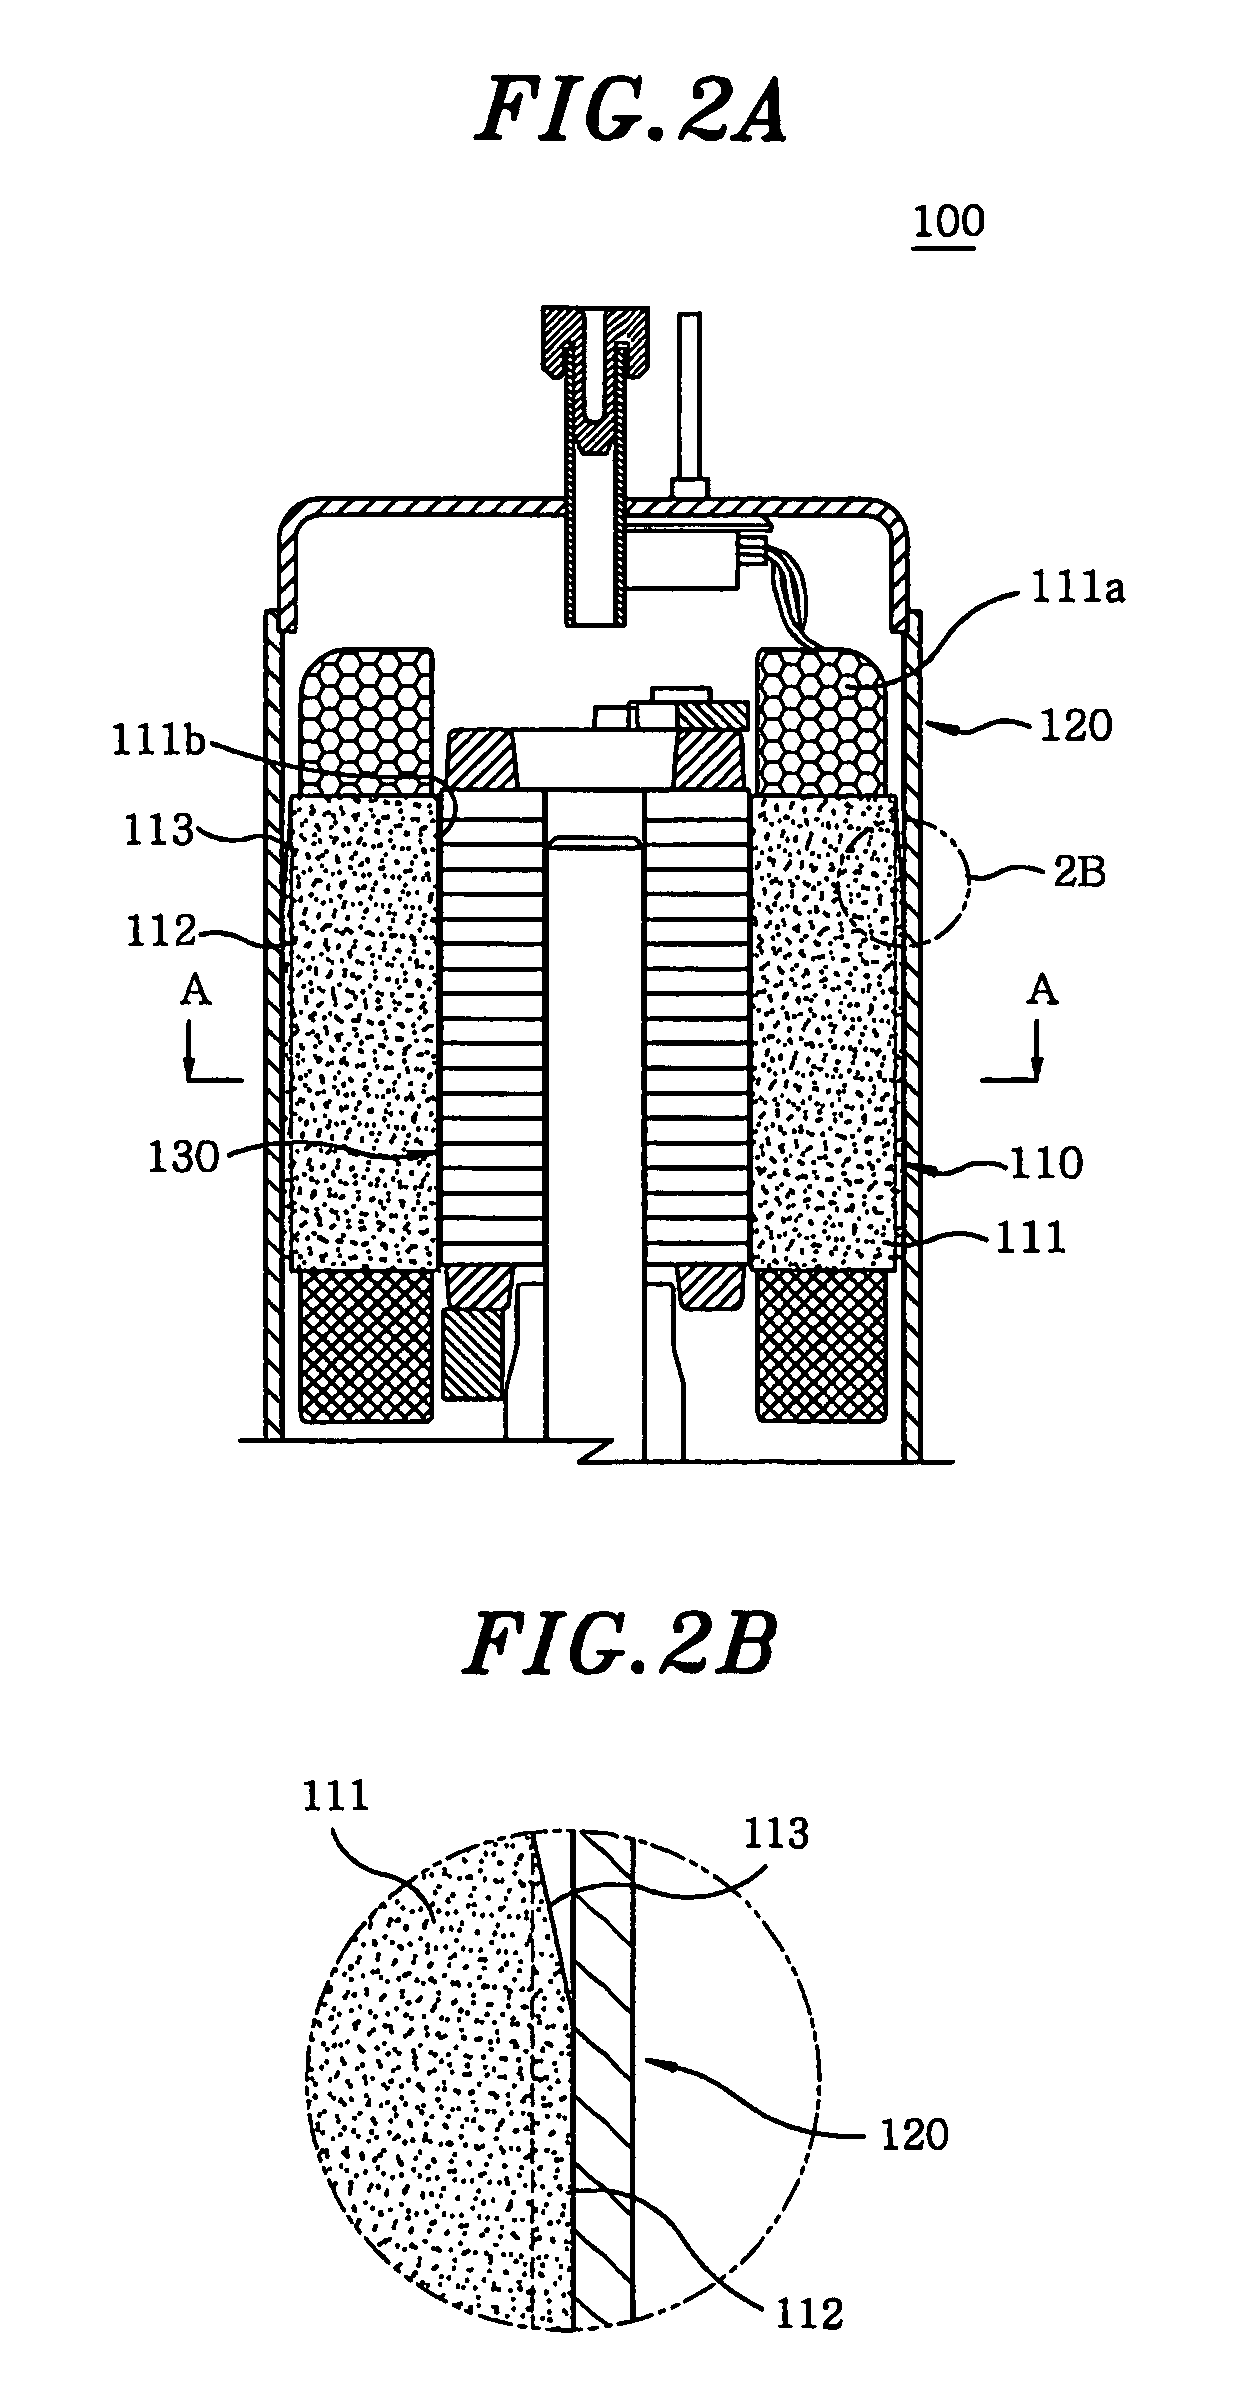 Motor having a stator and a rotor made of soft magnetic powder material